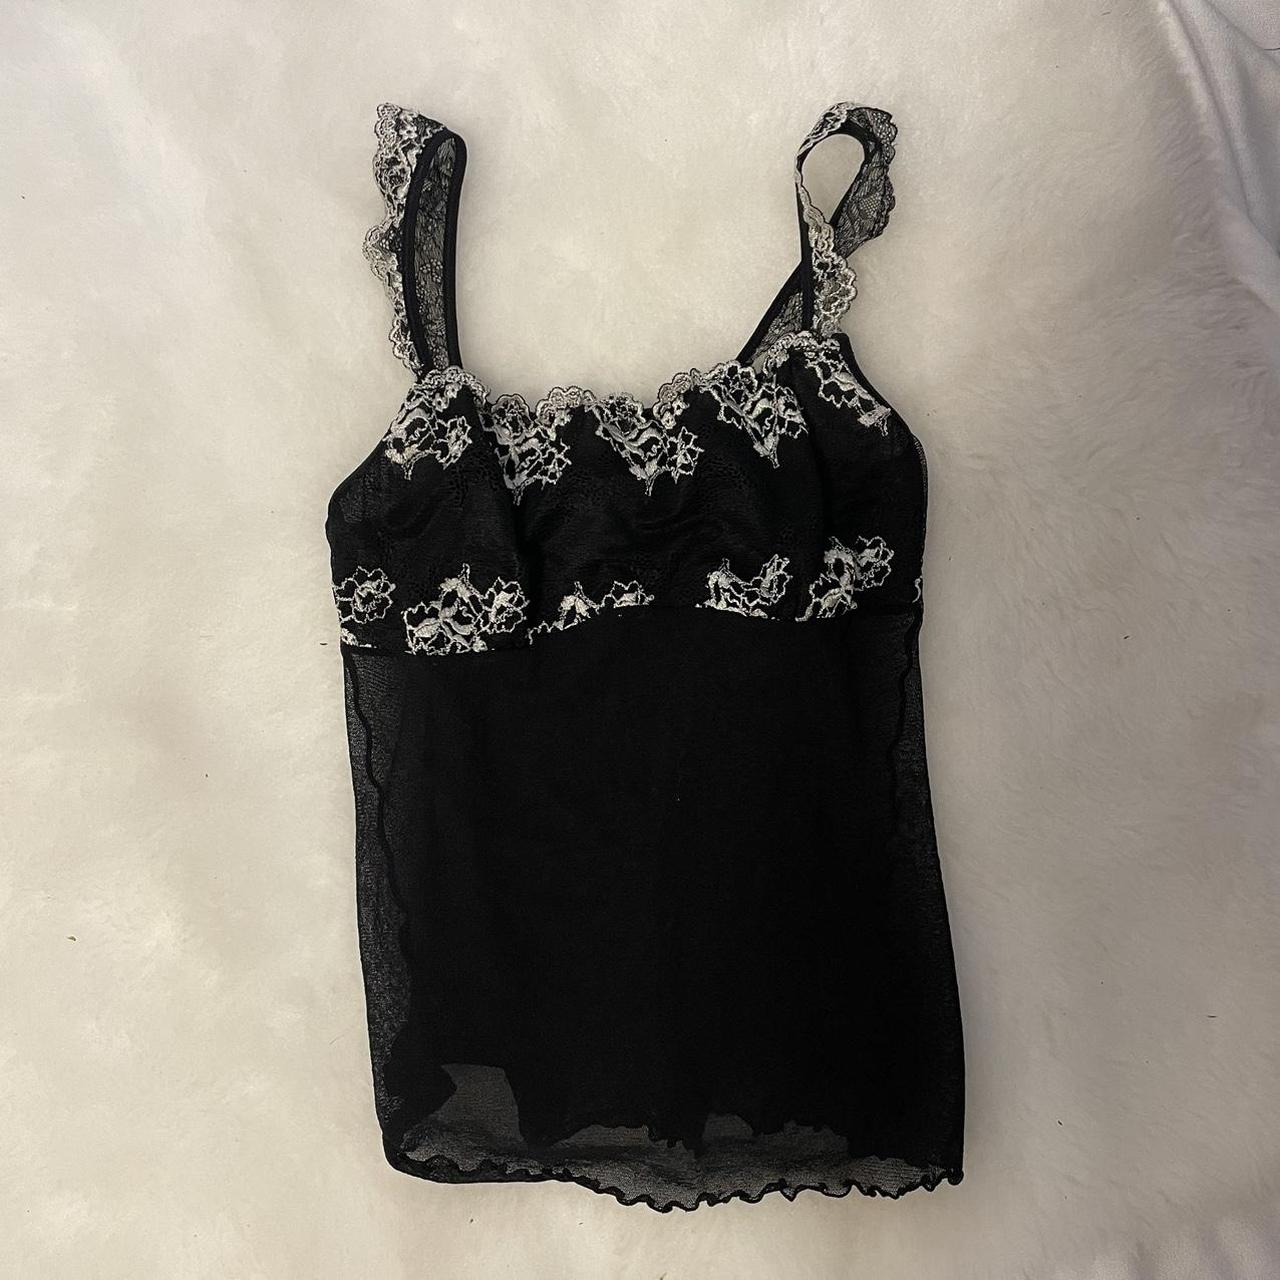 black & white sheer lace cami top !! , has an extra